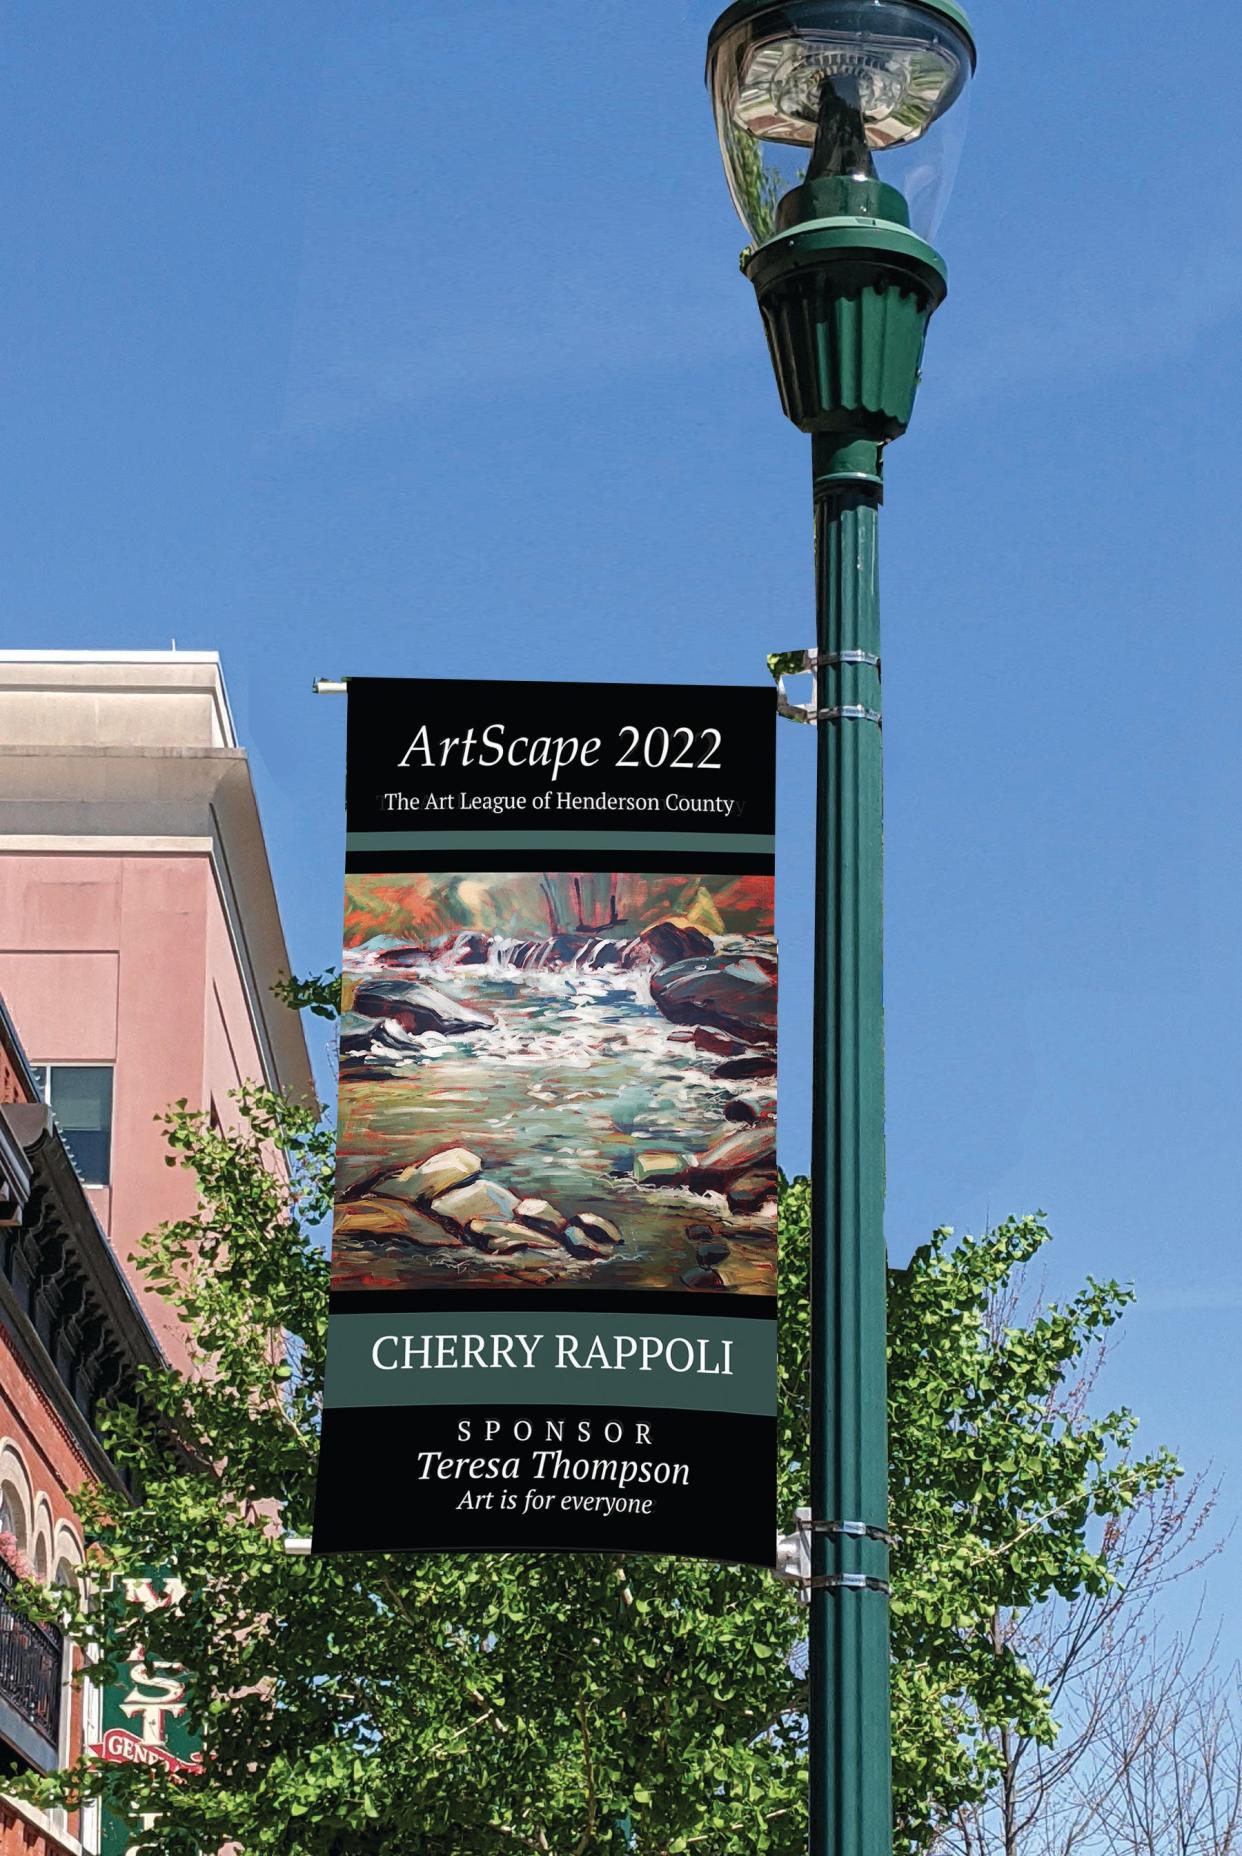 ArtScape’s colorful and artistic banners will be hung by the City of Hendersonville along Main Street and downtown avenues.